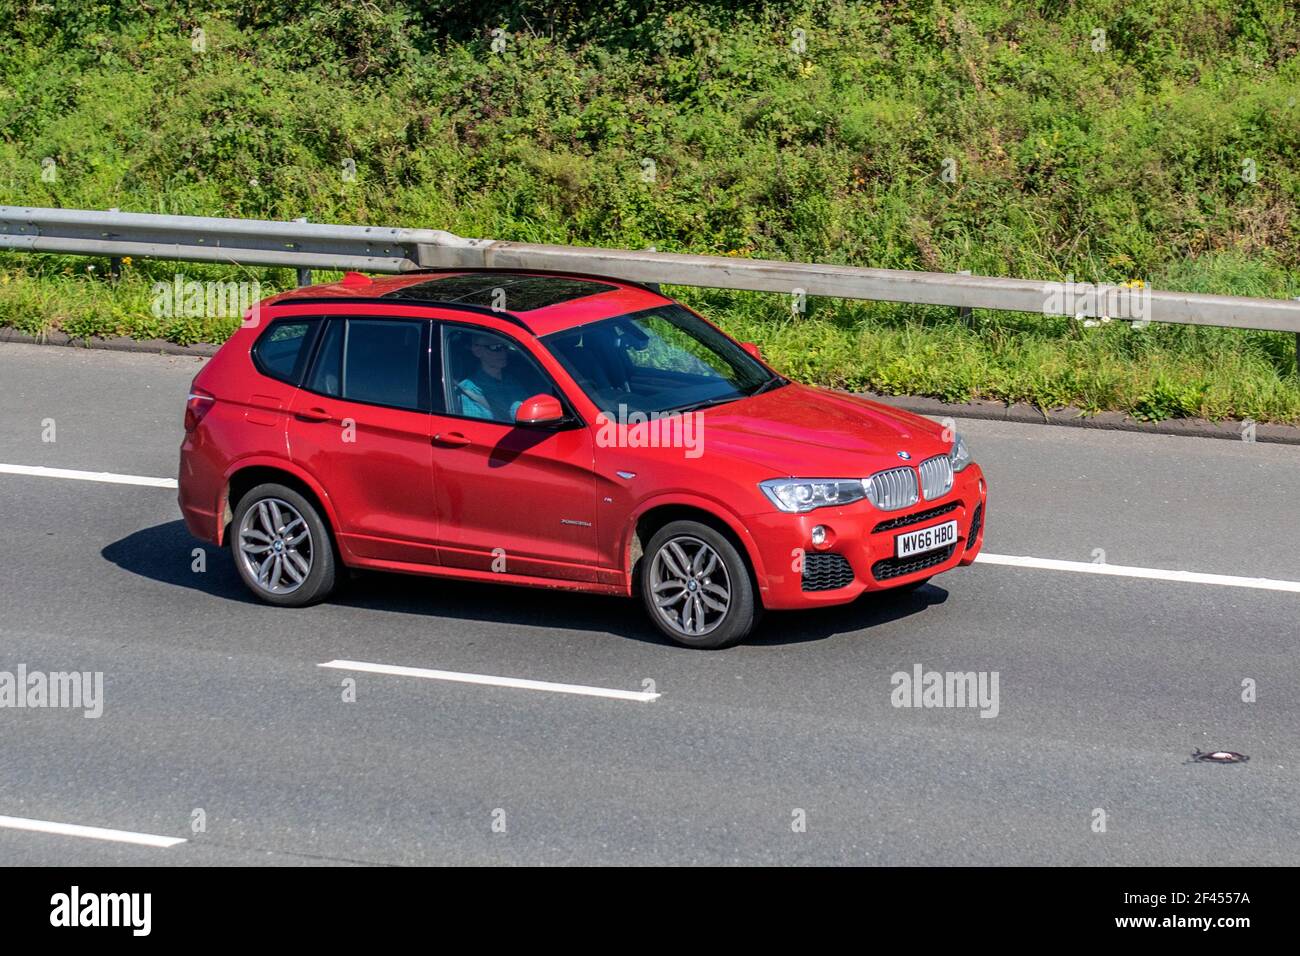 2016 red BMW X3 Xdrive35d M Sport Auto 2993cc diesel SUV; Vehicular traffic, moving vehicles, cars, vehicle driving on UK roads, motors, motoring on the M6 motorway highway road network Stock Photo